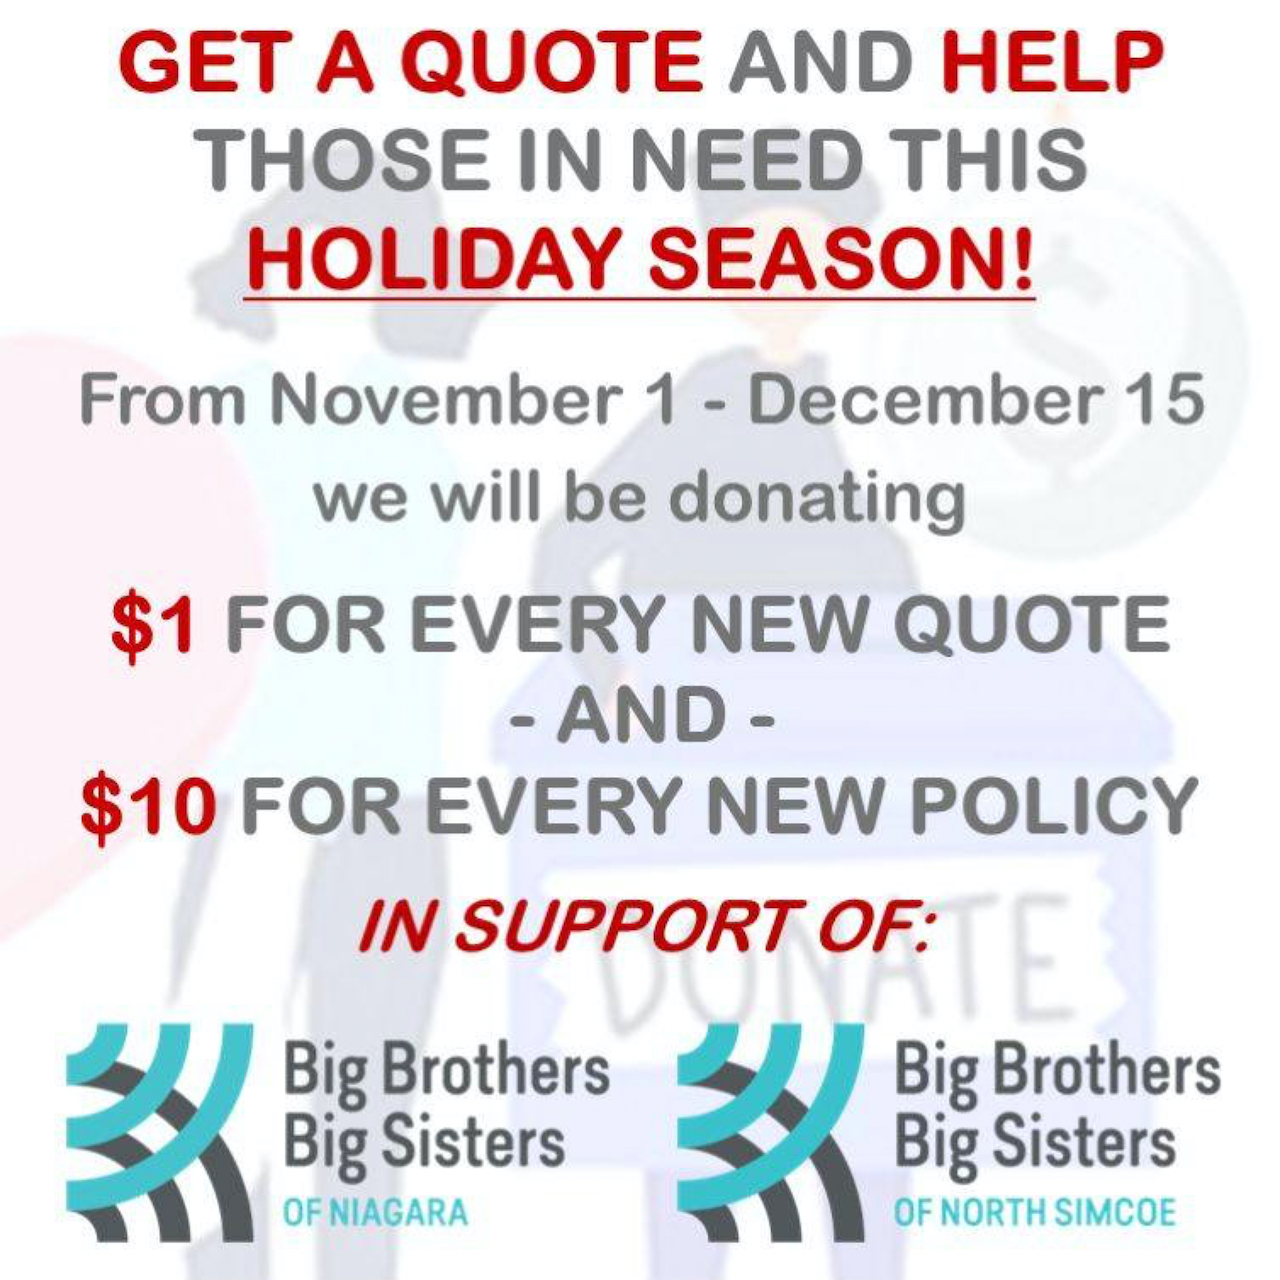 Get a Quote from Chambers Insurance and Help Those In Need This Holiday Season